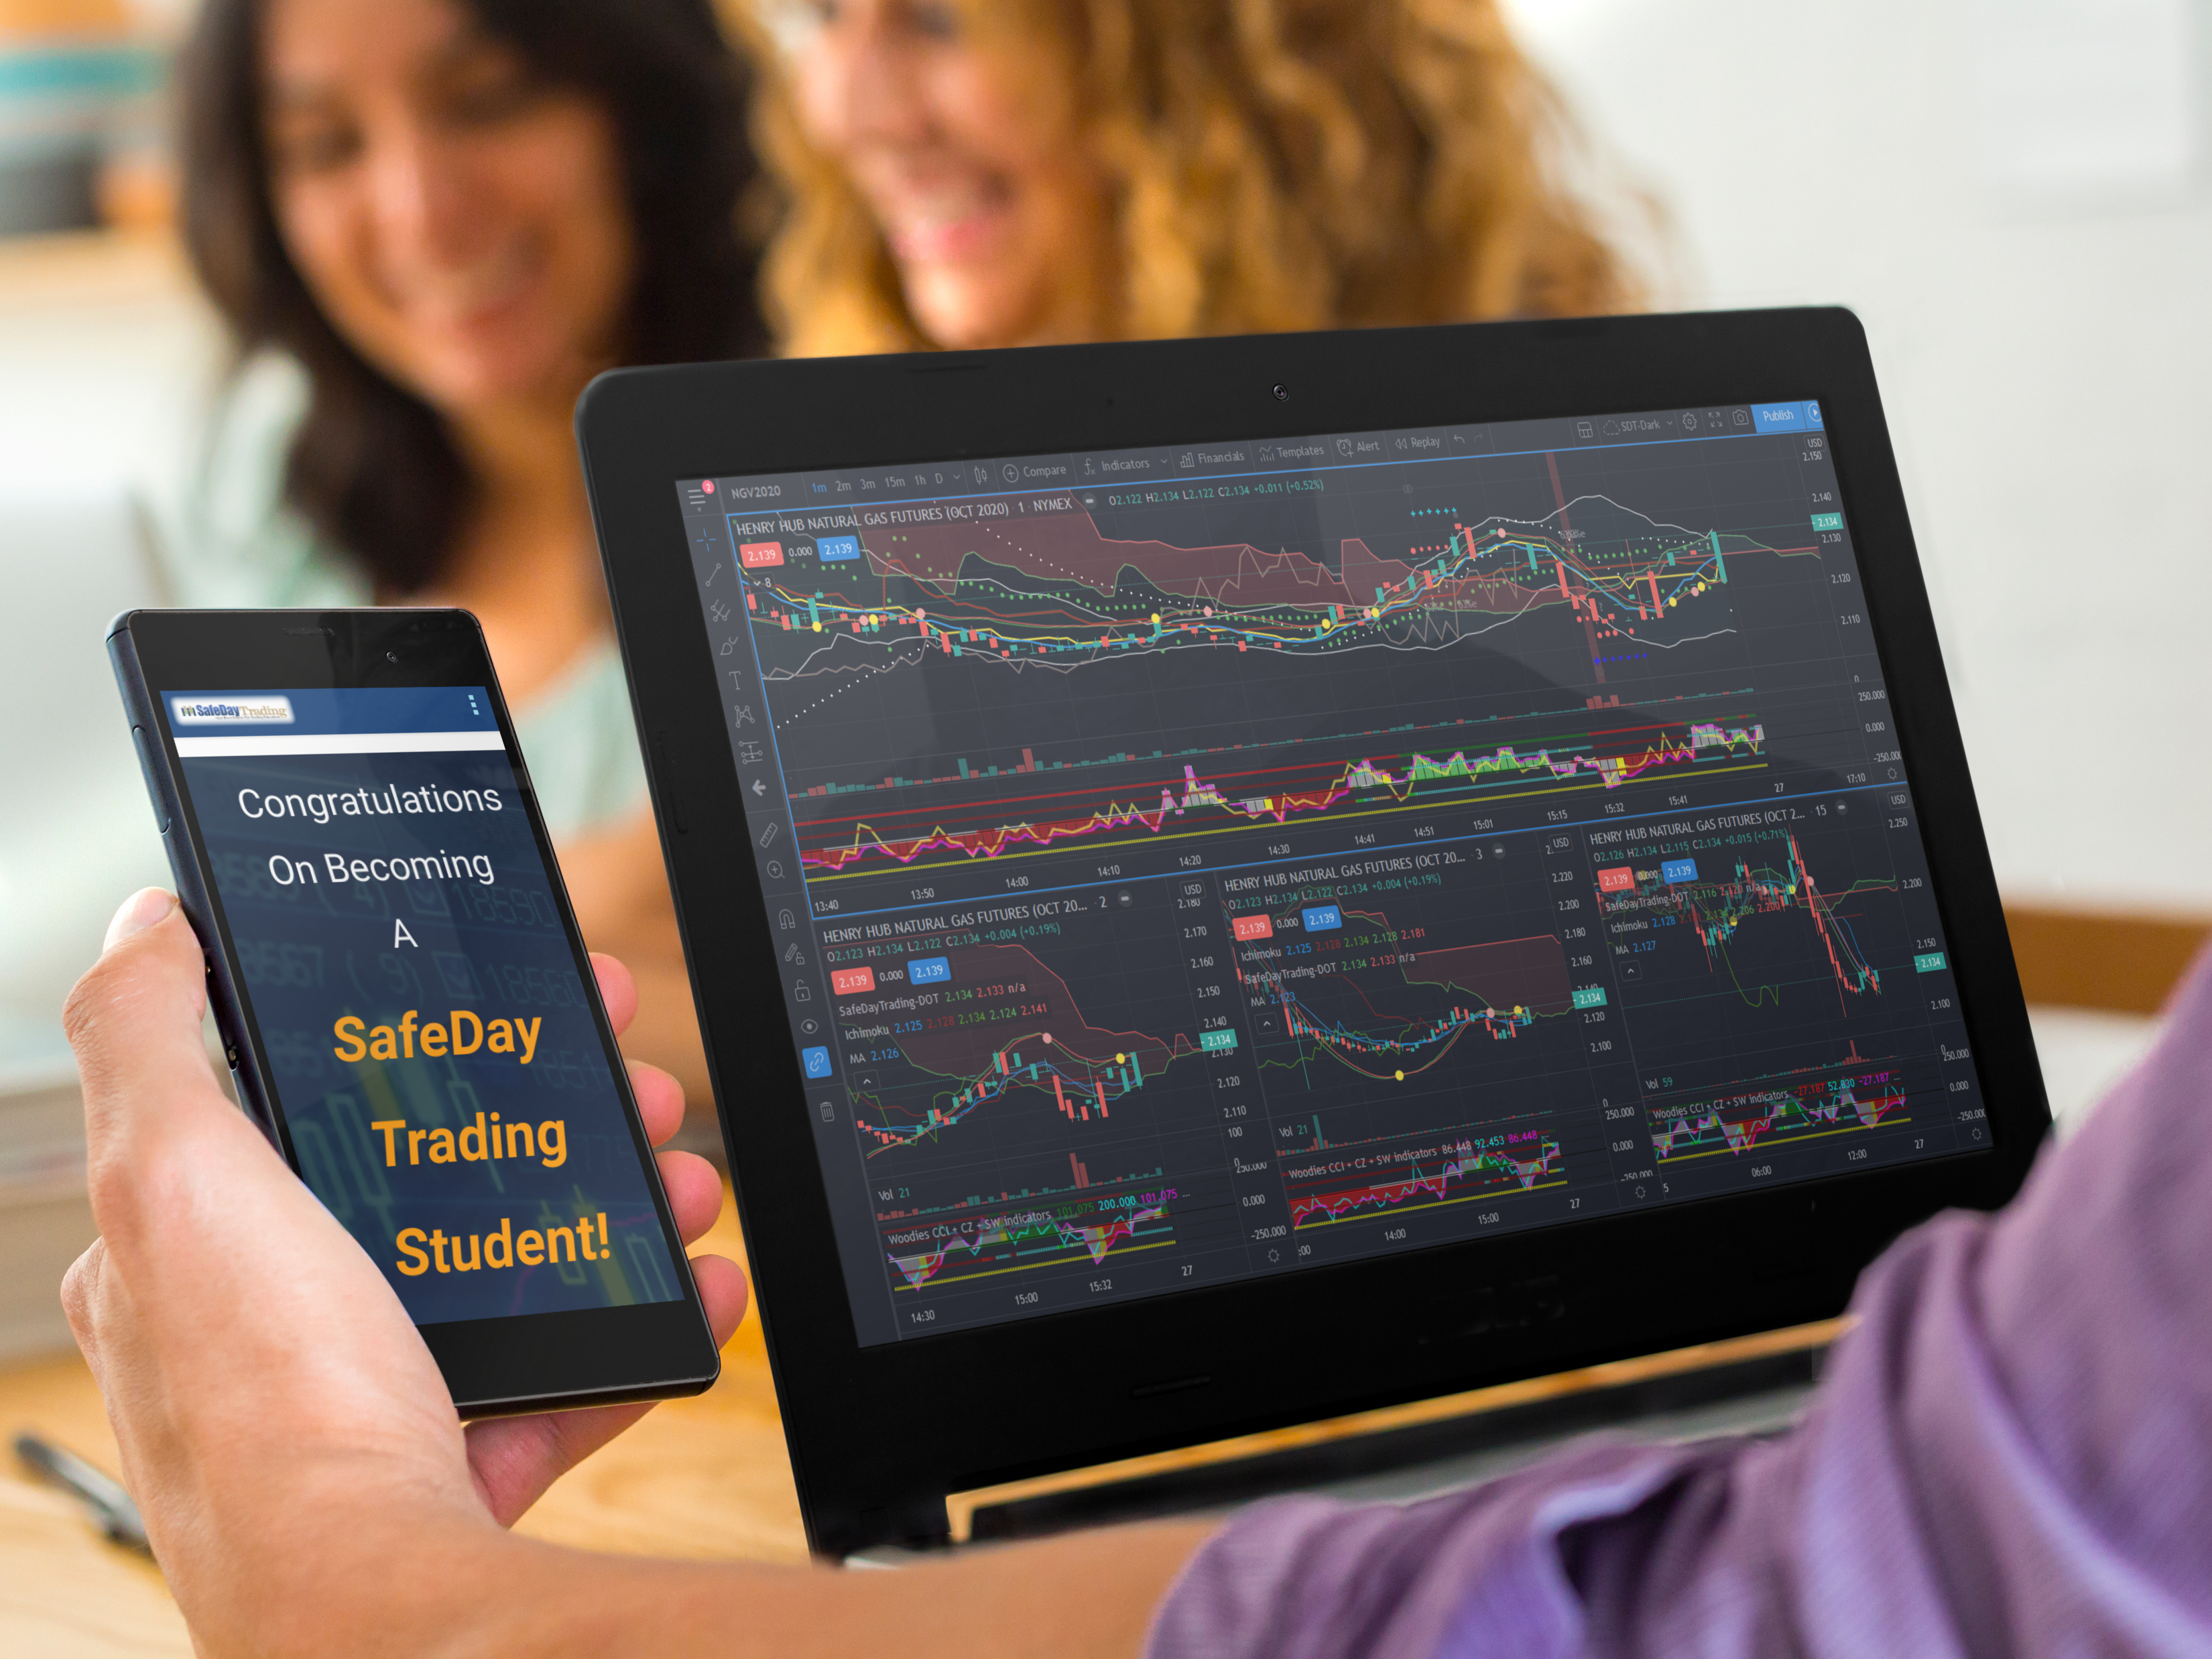 Day trading with SafeDay Trading